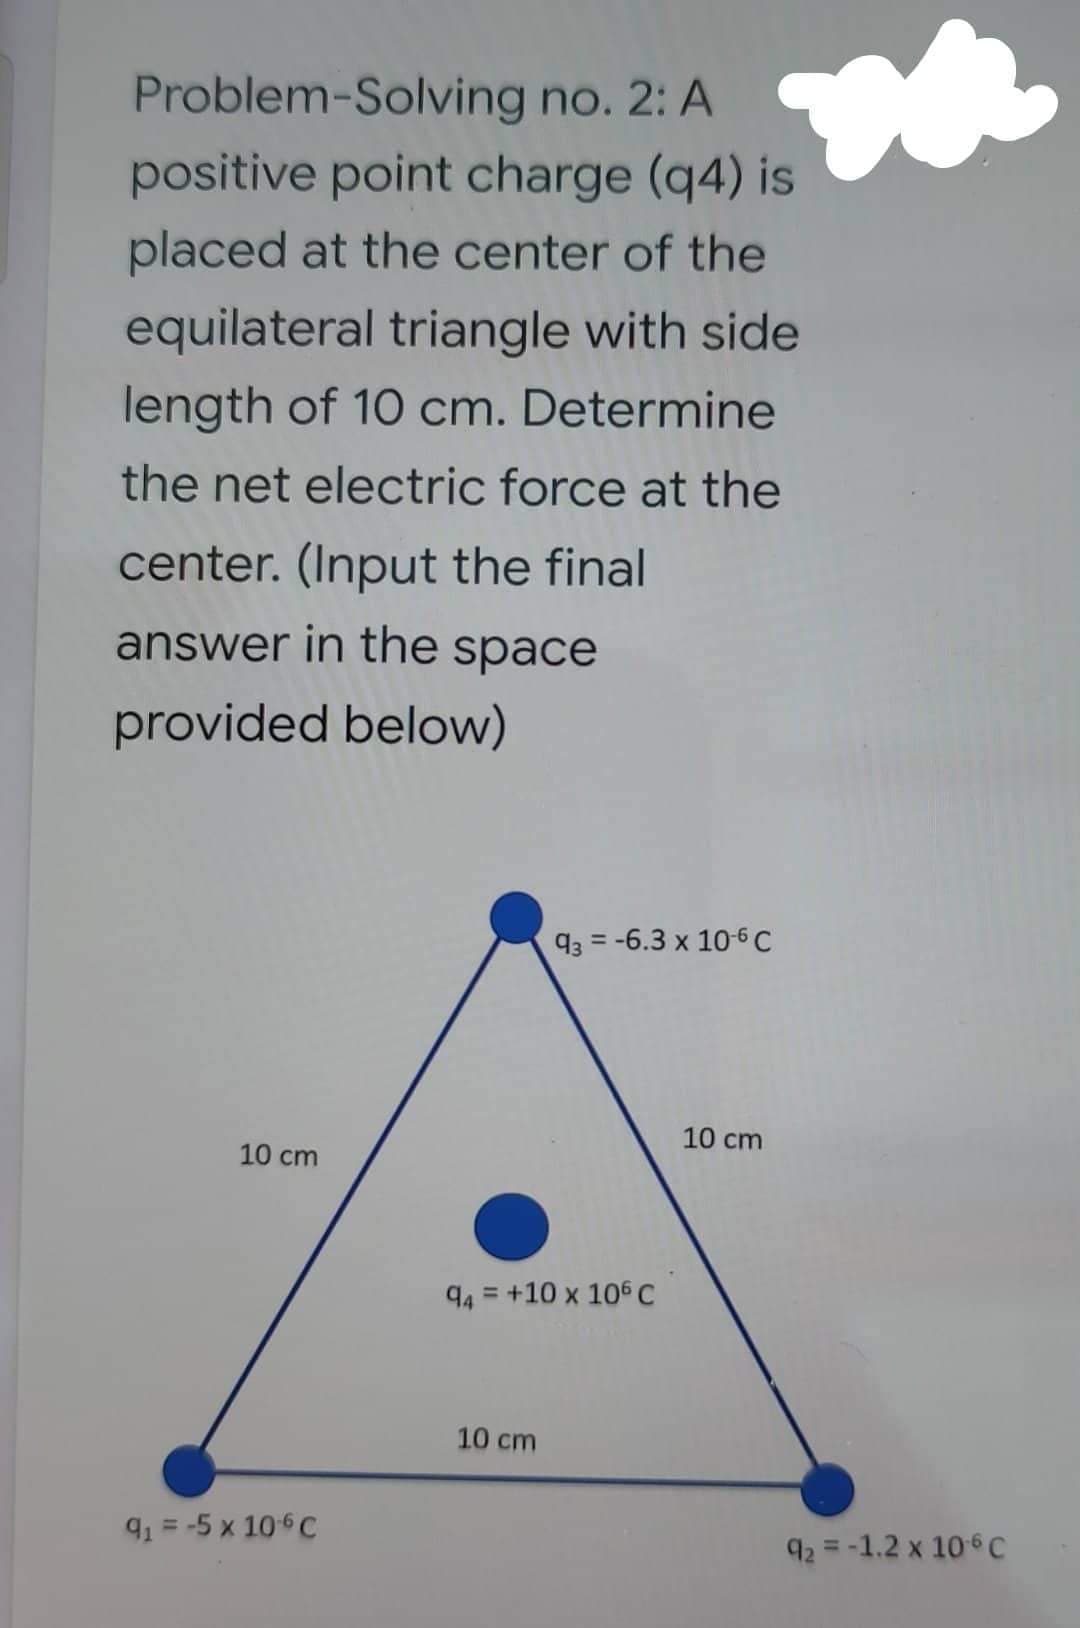 Problem Solving no. 2: A
positive point charge (q4) is
placed at the center of the
equilateral triangle with side
length of 10 cm. Determine
the net electric force at the
center. (Input the final
answer in the space
provided below)
10 cm
9₁ = -5 x 10-6 C
93-6.3 x 10-6 C
10 cm
94 +10 x 106 C
=
10 cm
92 -1.2 x 106 C